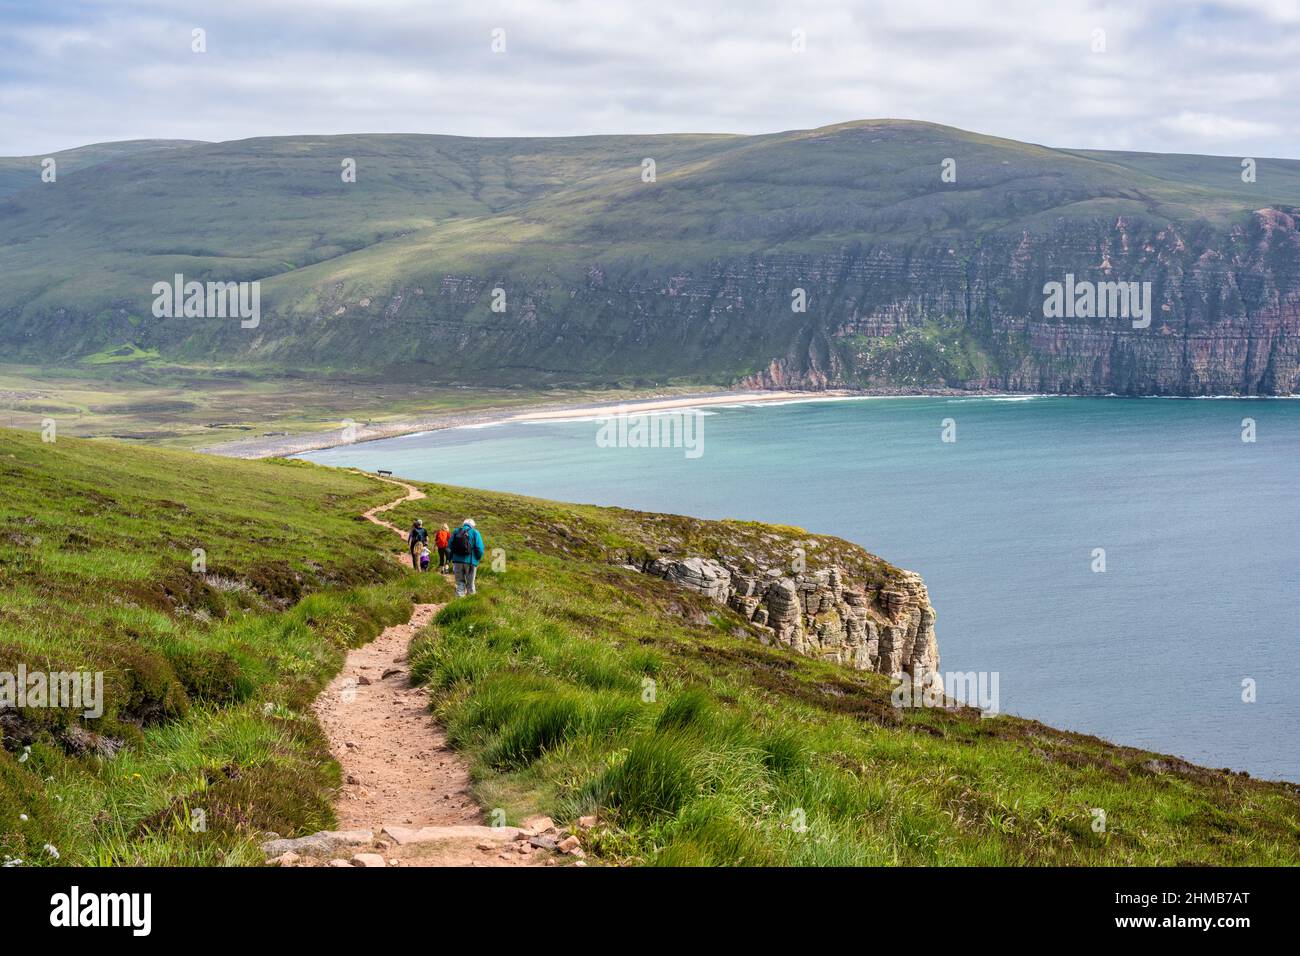 Walkers on the footpath from the Old Man of Hoy to Rackwick Bay, Isle of Hoy, Orkney, Scotland, UK Stock Photo